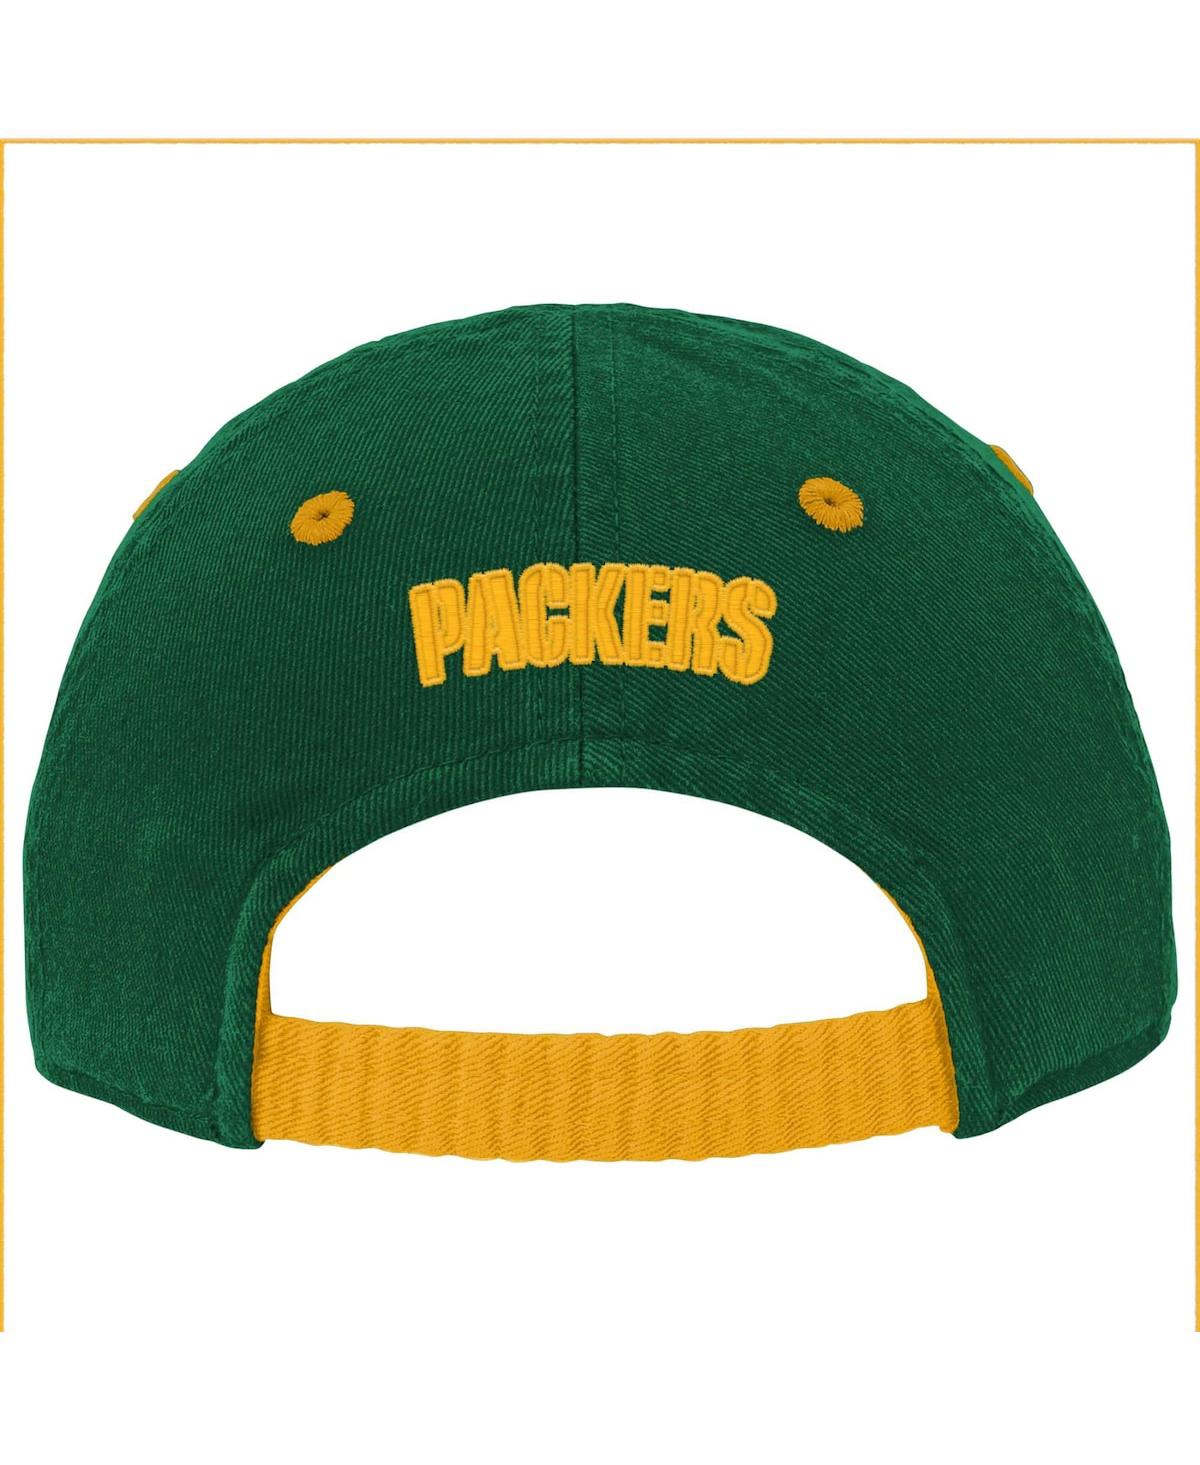 Shop Outerstuff Boys And Girls Infant Green Green Bay Packers Team Slouch Flex Hat